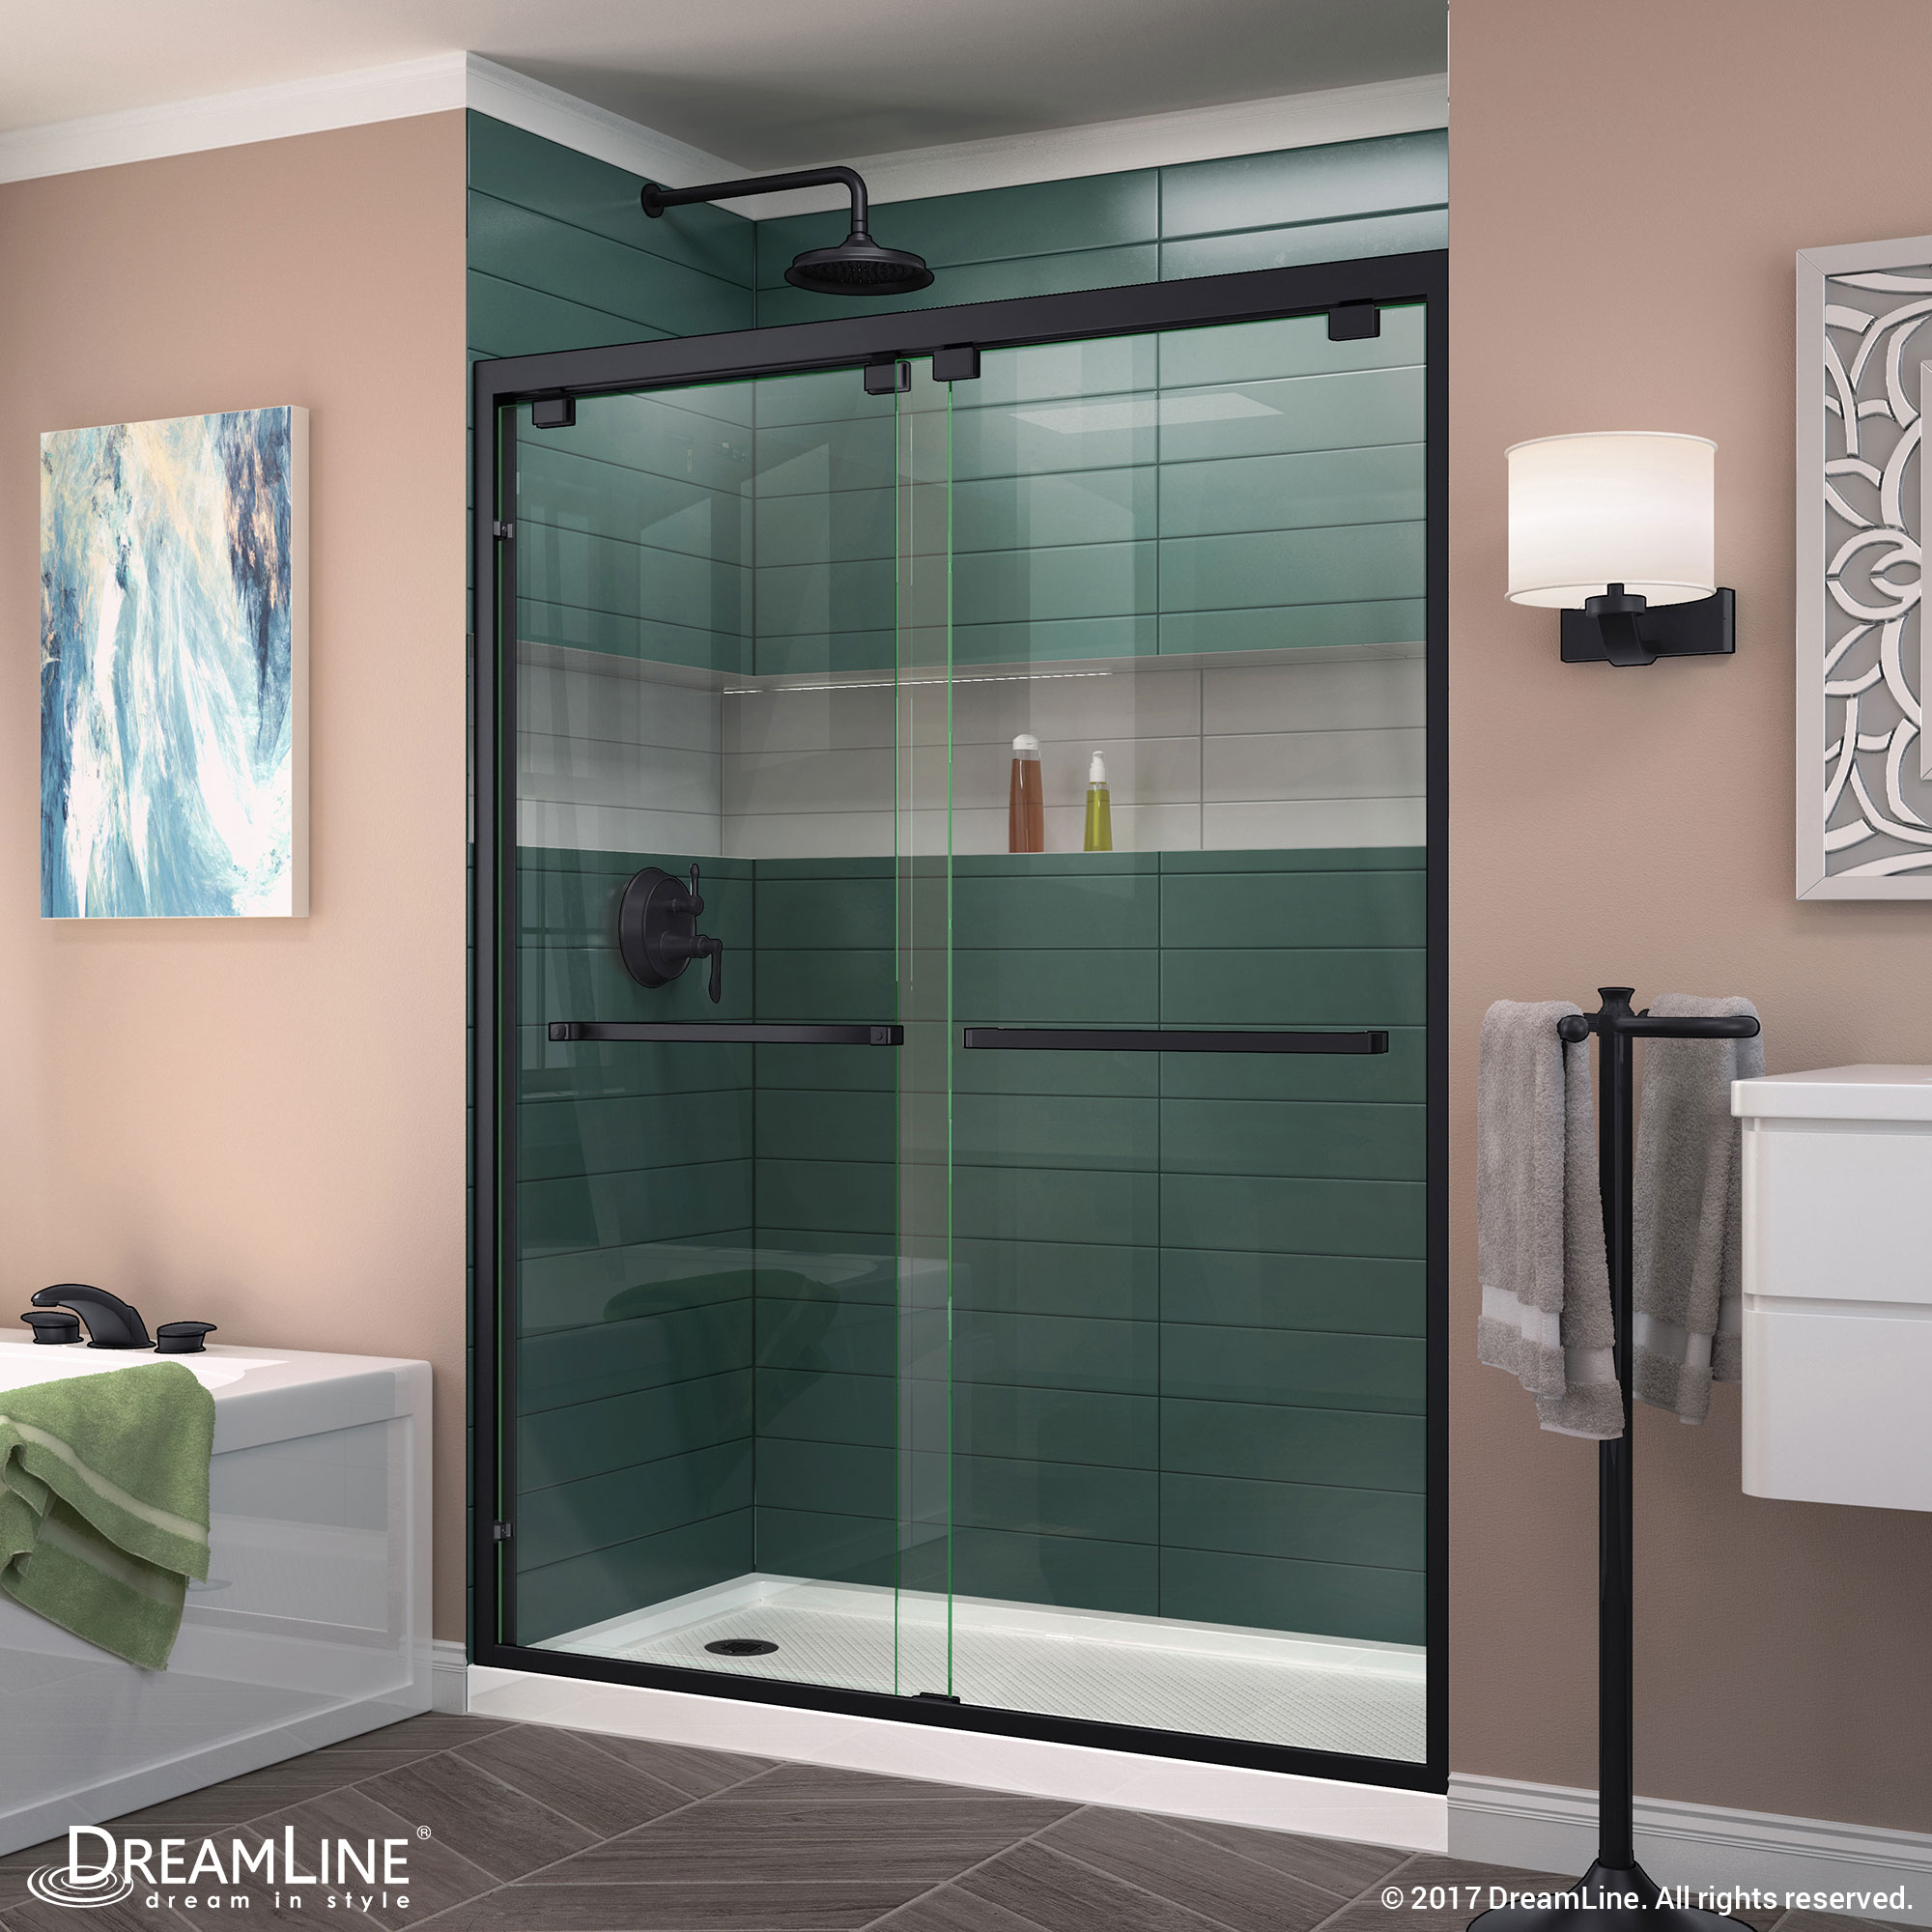 DreamLine Encore 36 in. D x 60 in. W x 78 3/4 in. H Bypass Shower Door in Oil Rubbed Bronze and Left Drain White Base Kit